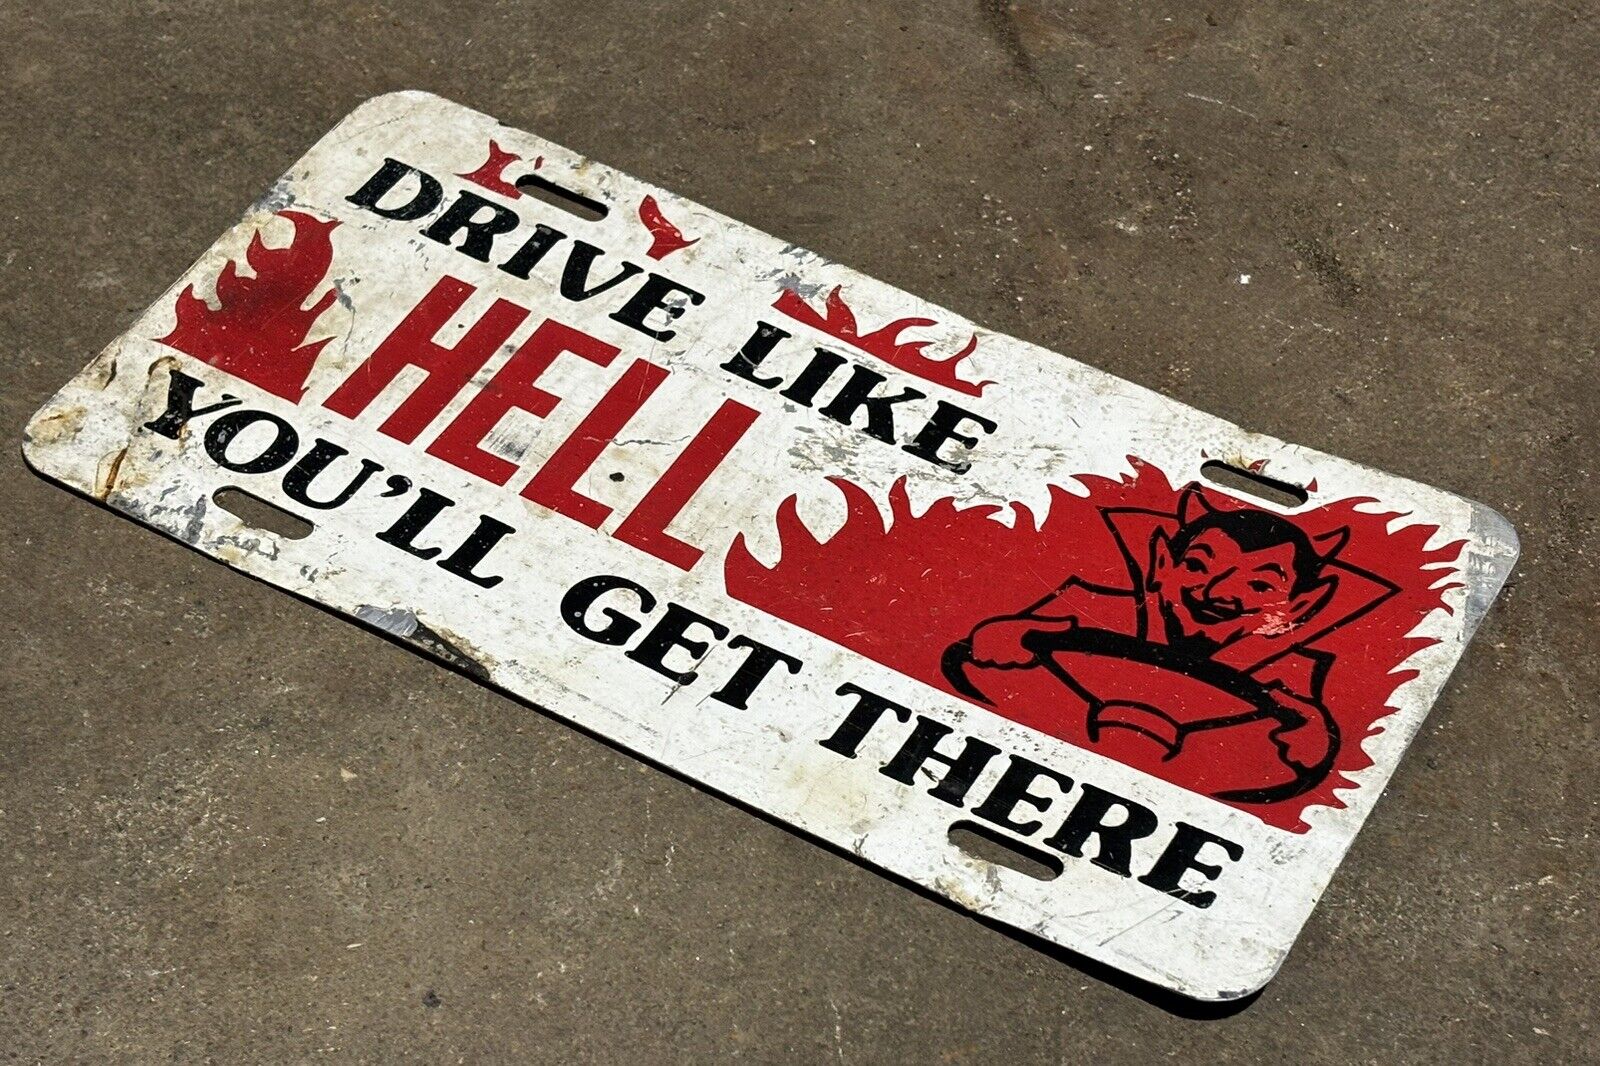 Vtg 70’s/80’s Drive Like Hell You’ll Get There novelty license plate 